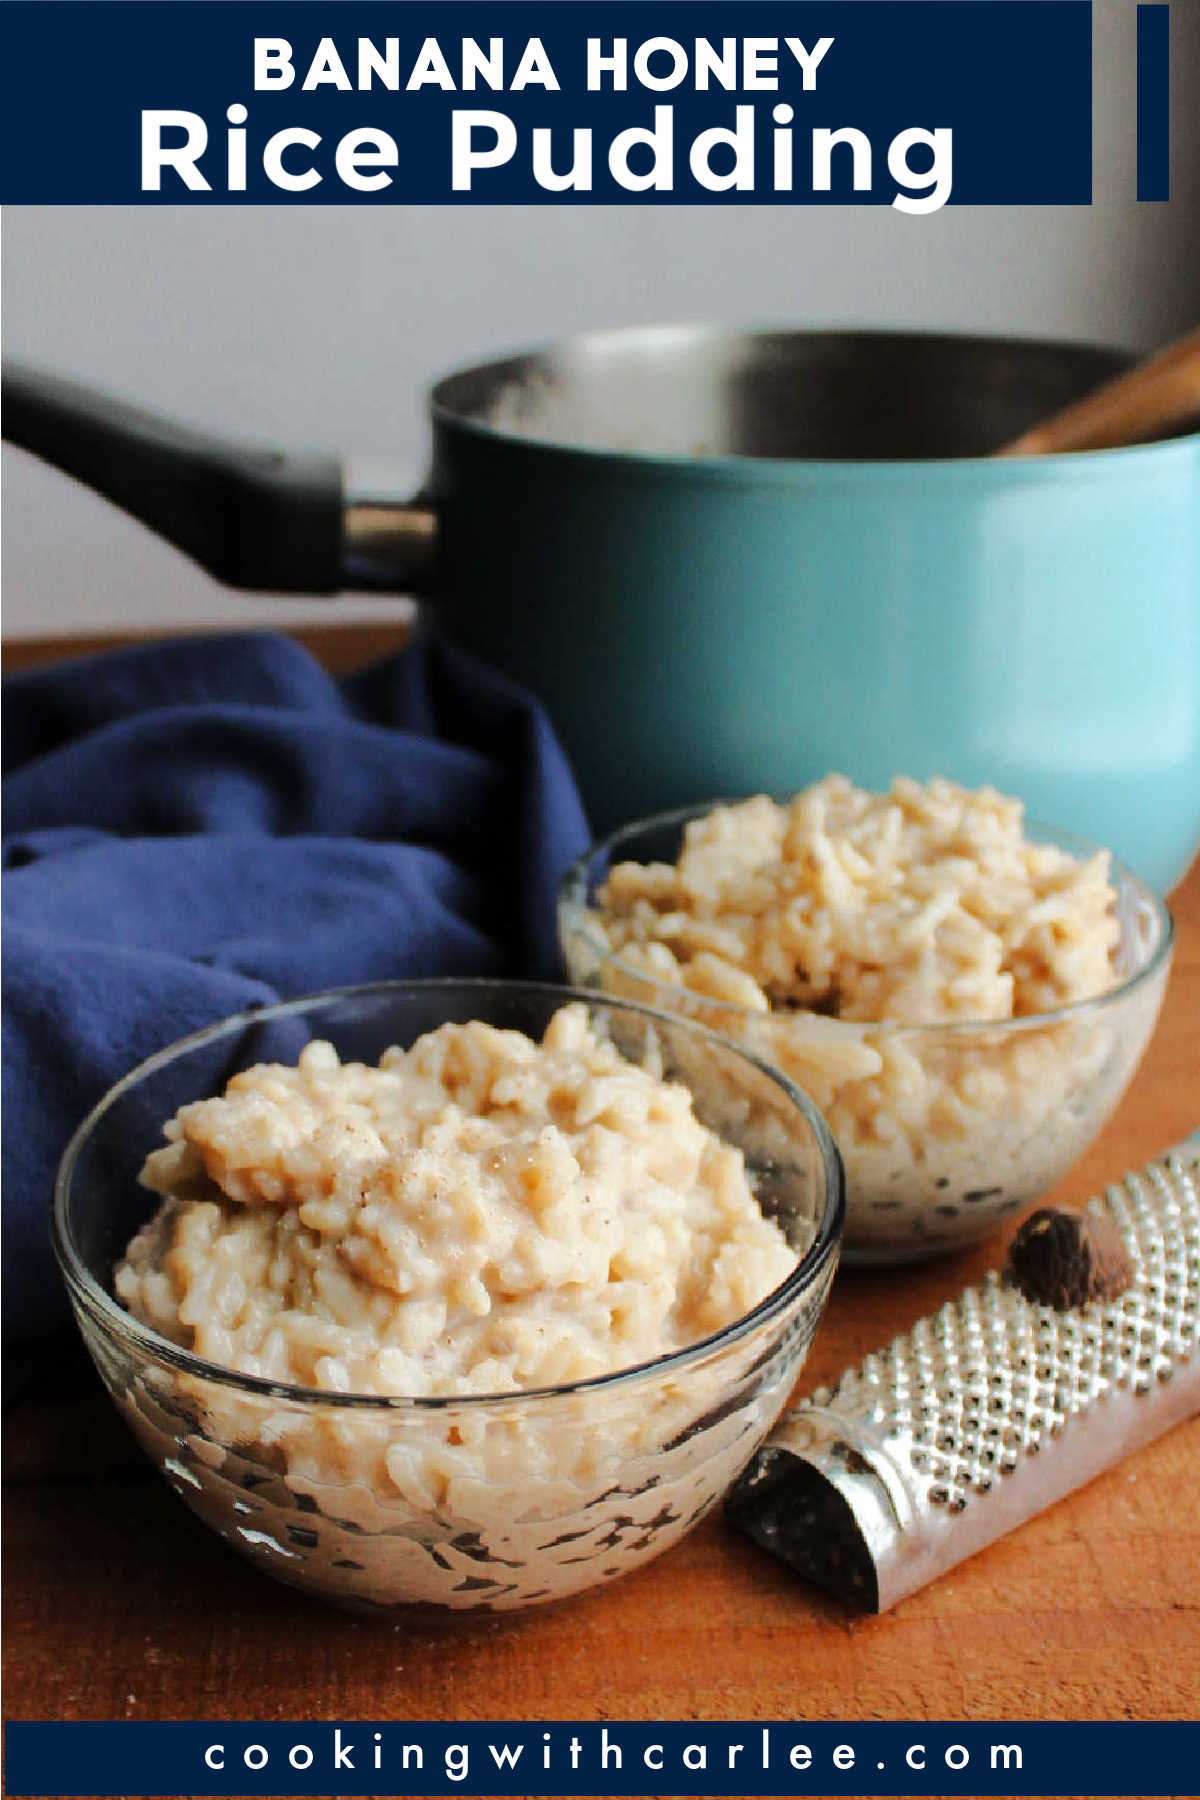 This creamy rice pudding gets its sweet goodness from ripe banana and honey.  It is a great way to turn leftover rice into a simple and delicious dessert.